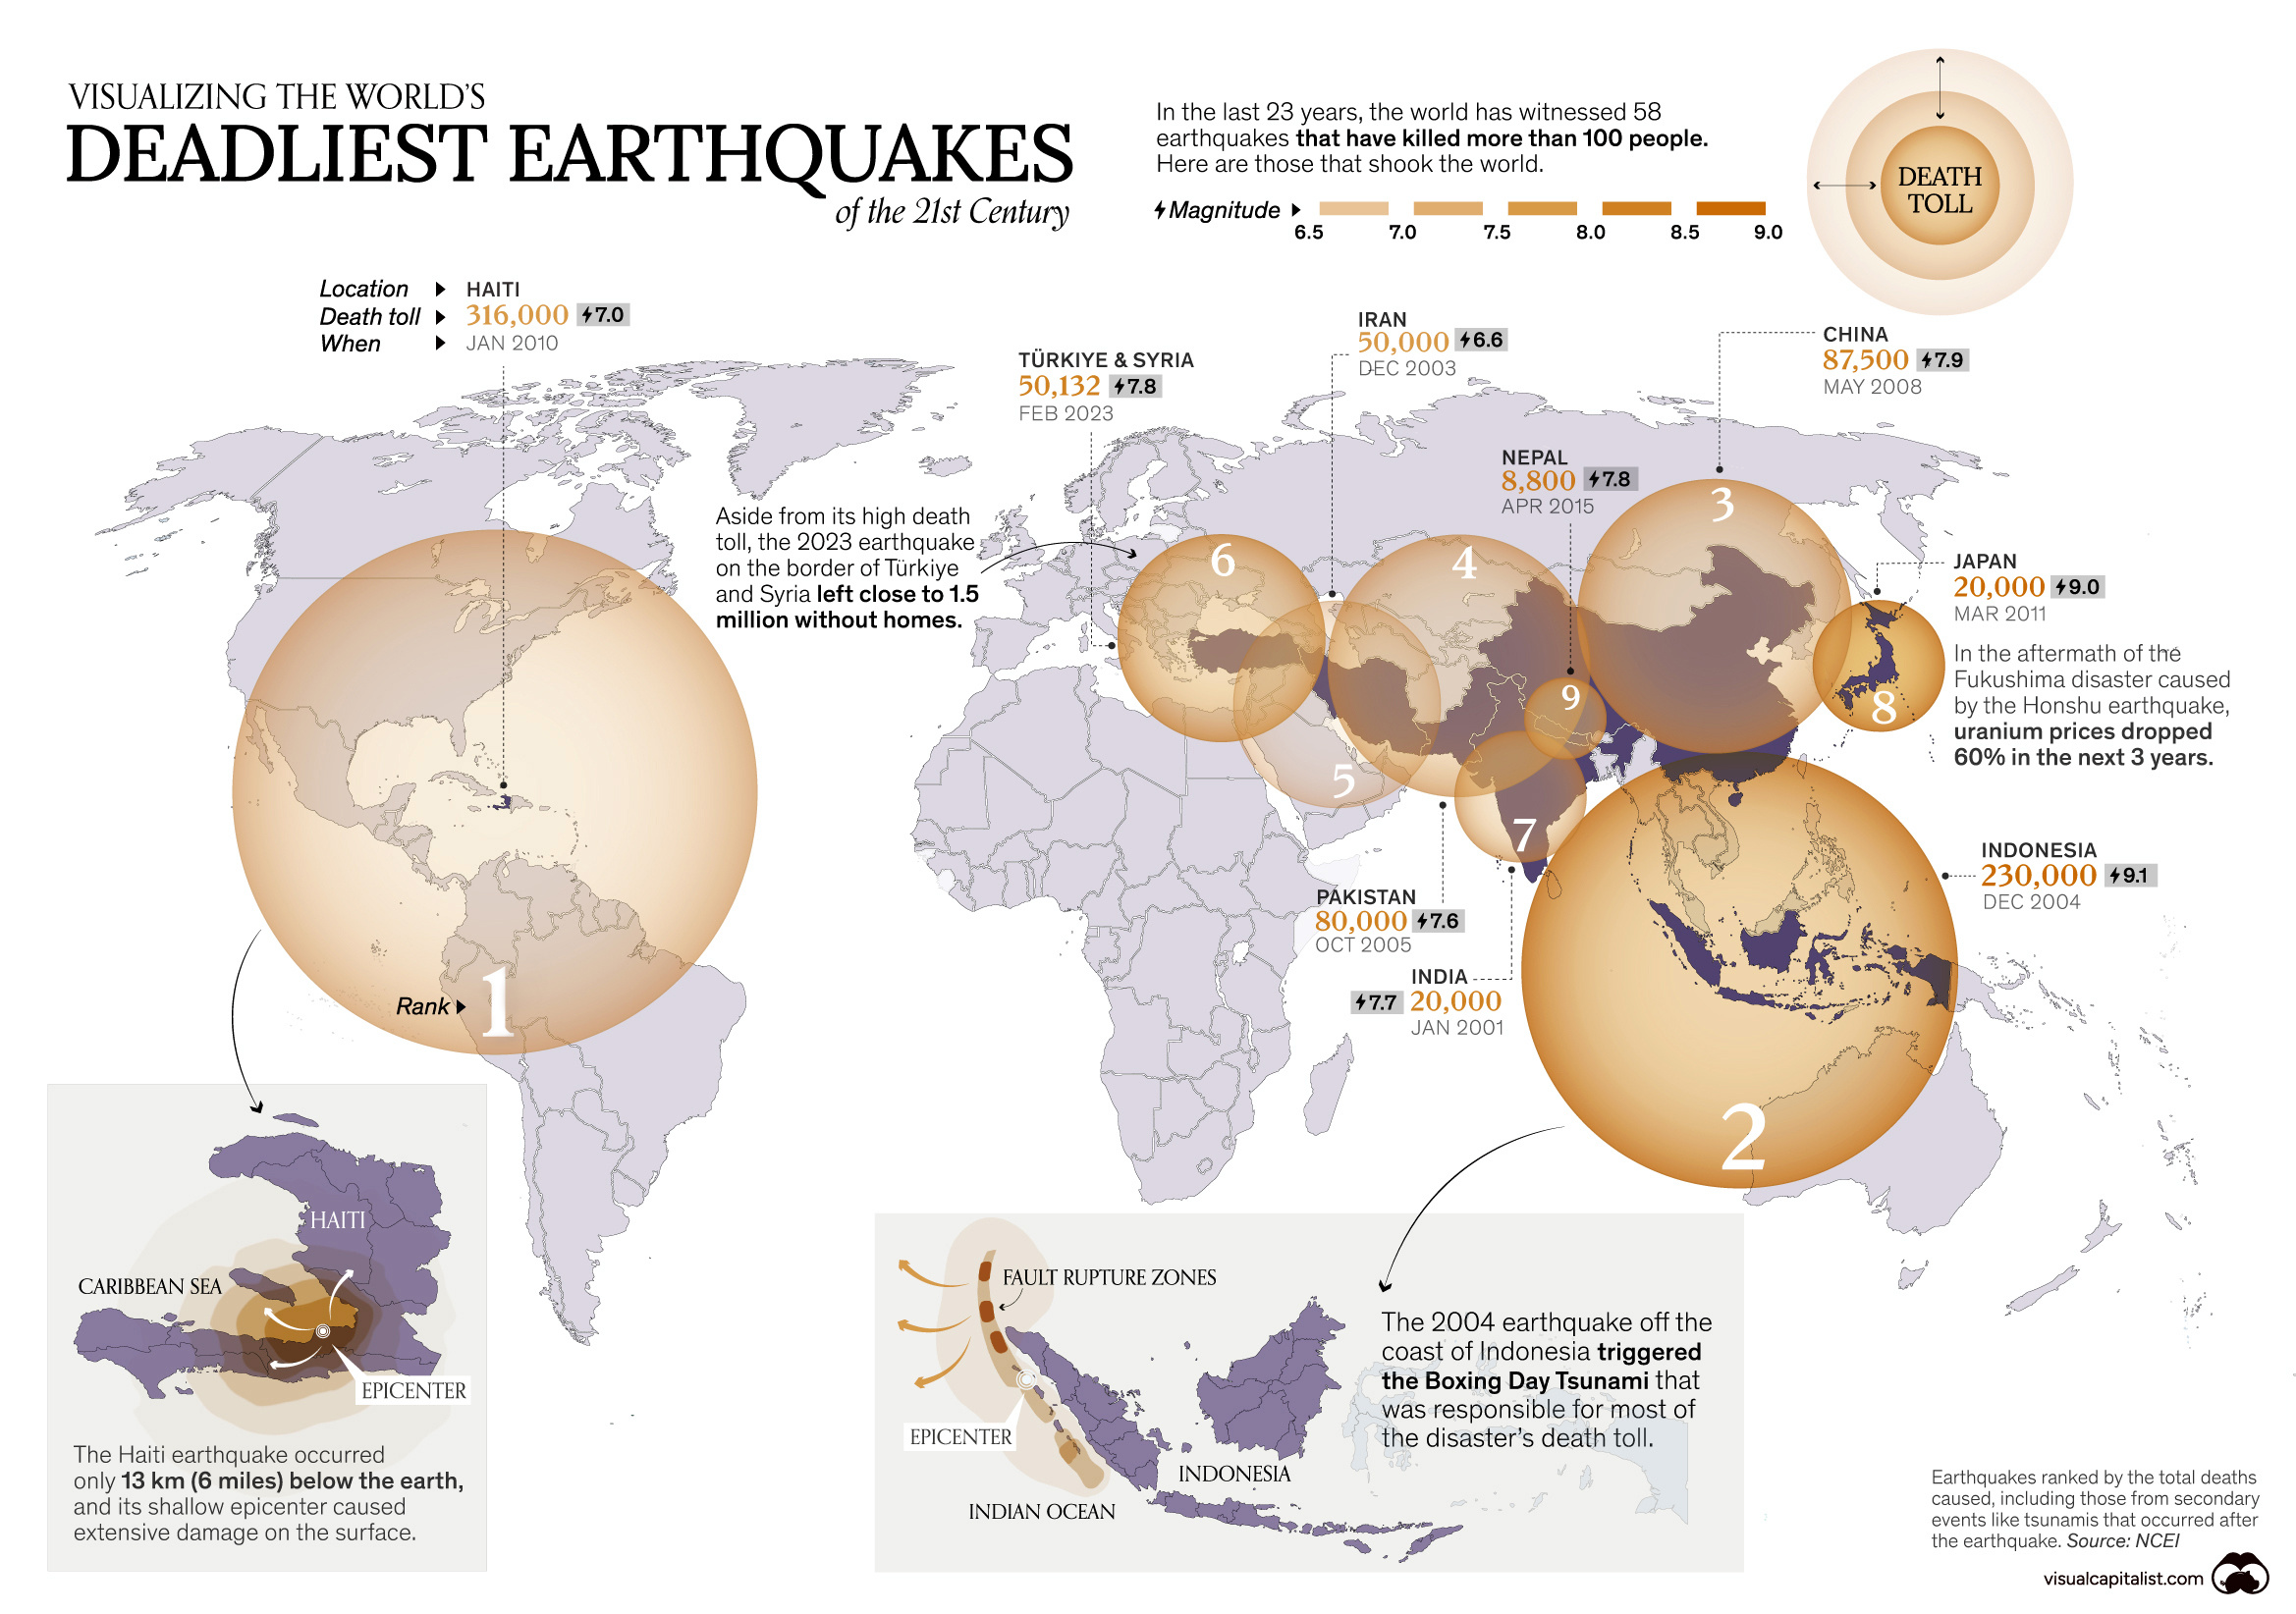 A Look at the Most Devastating Earthquakes of the 21st Century